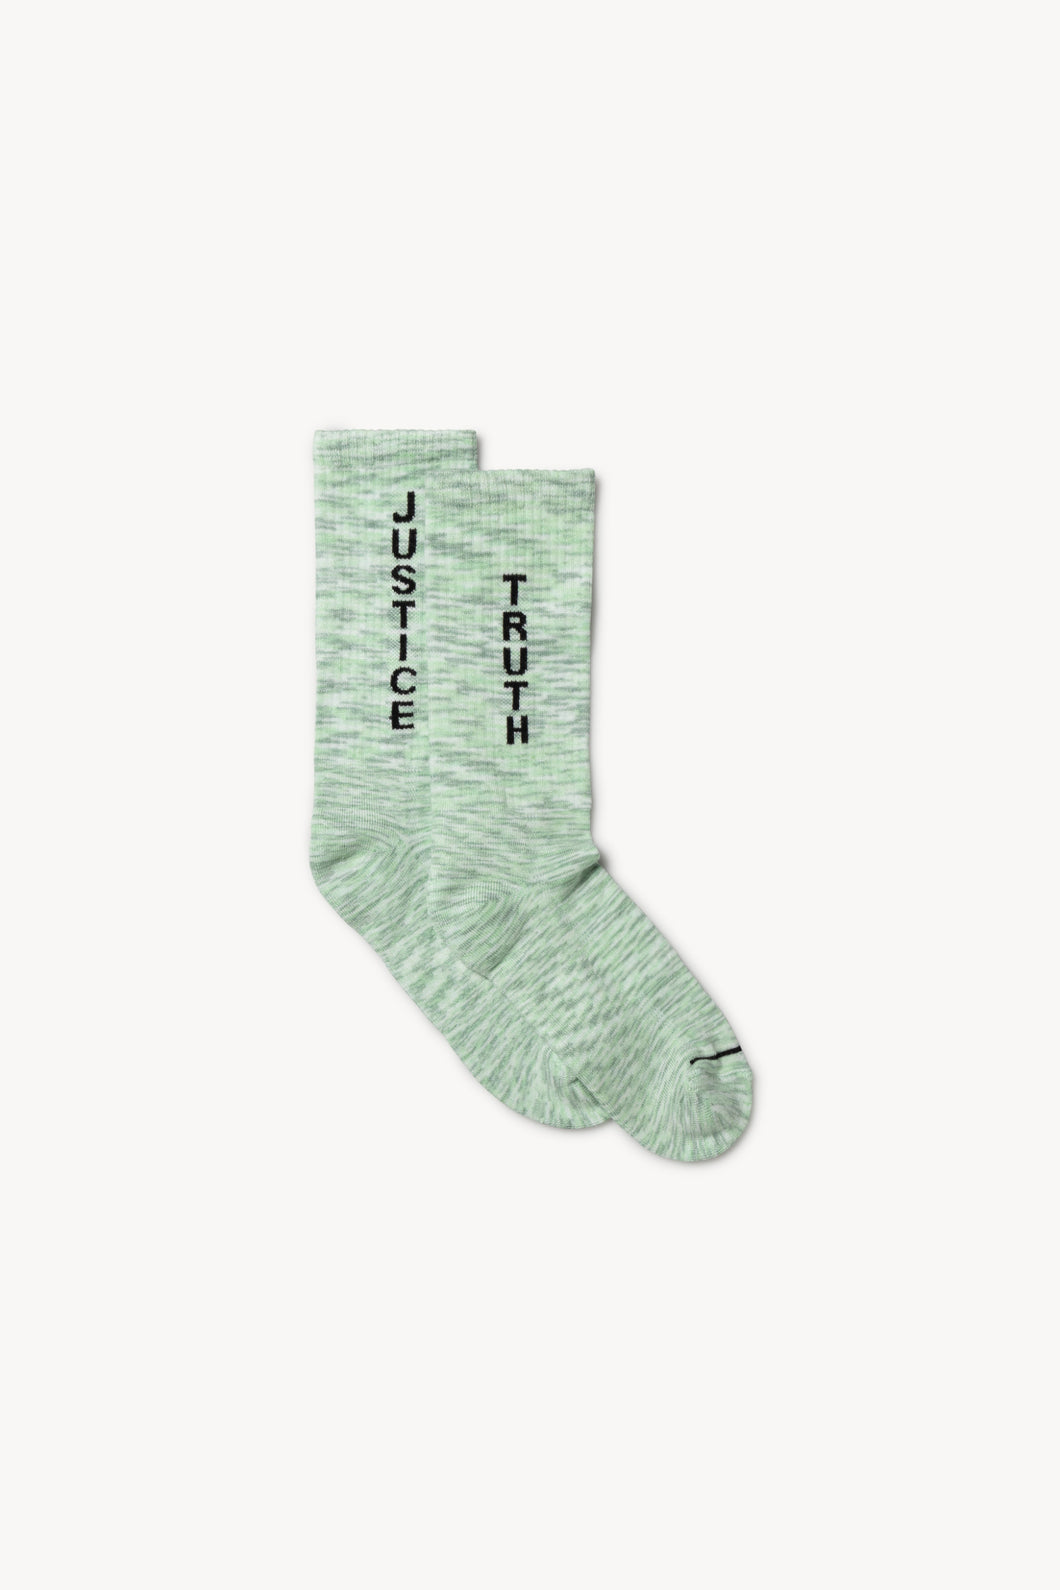 Truth and Justice Space Dye Sock